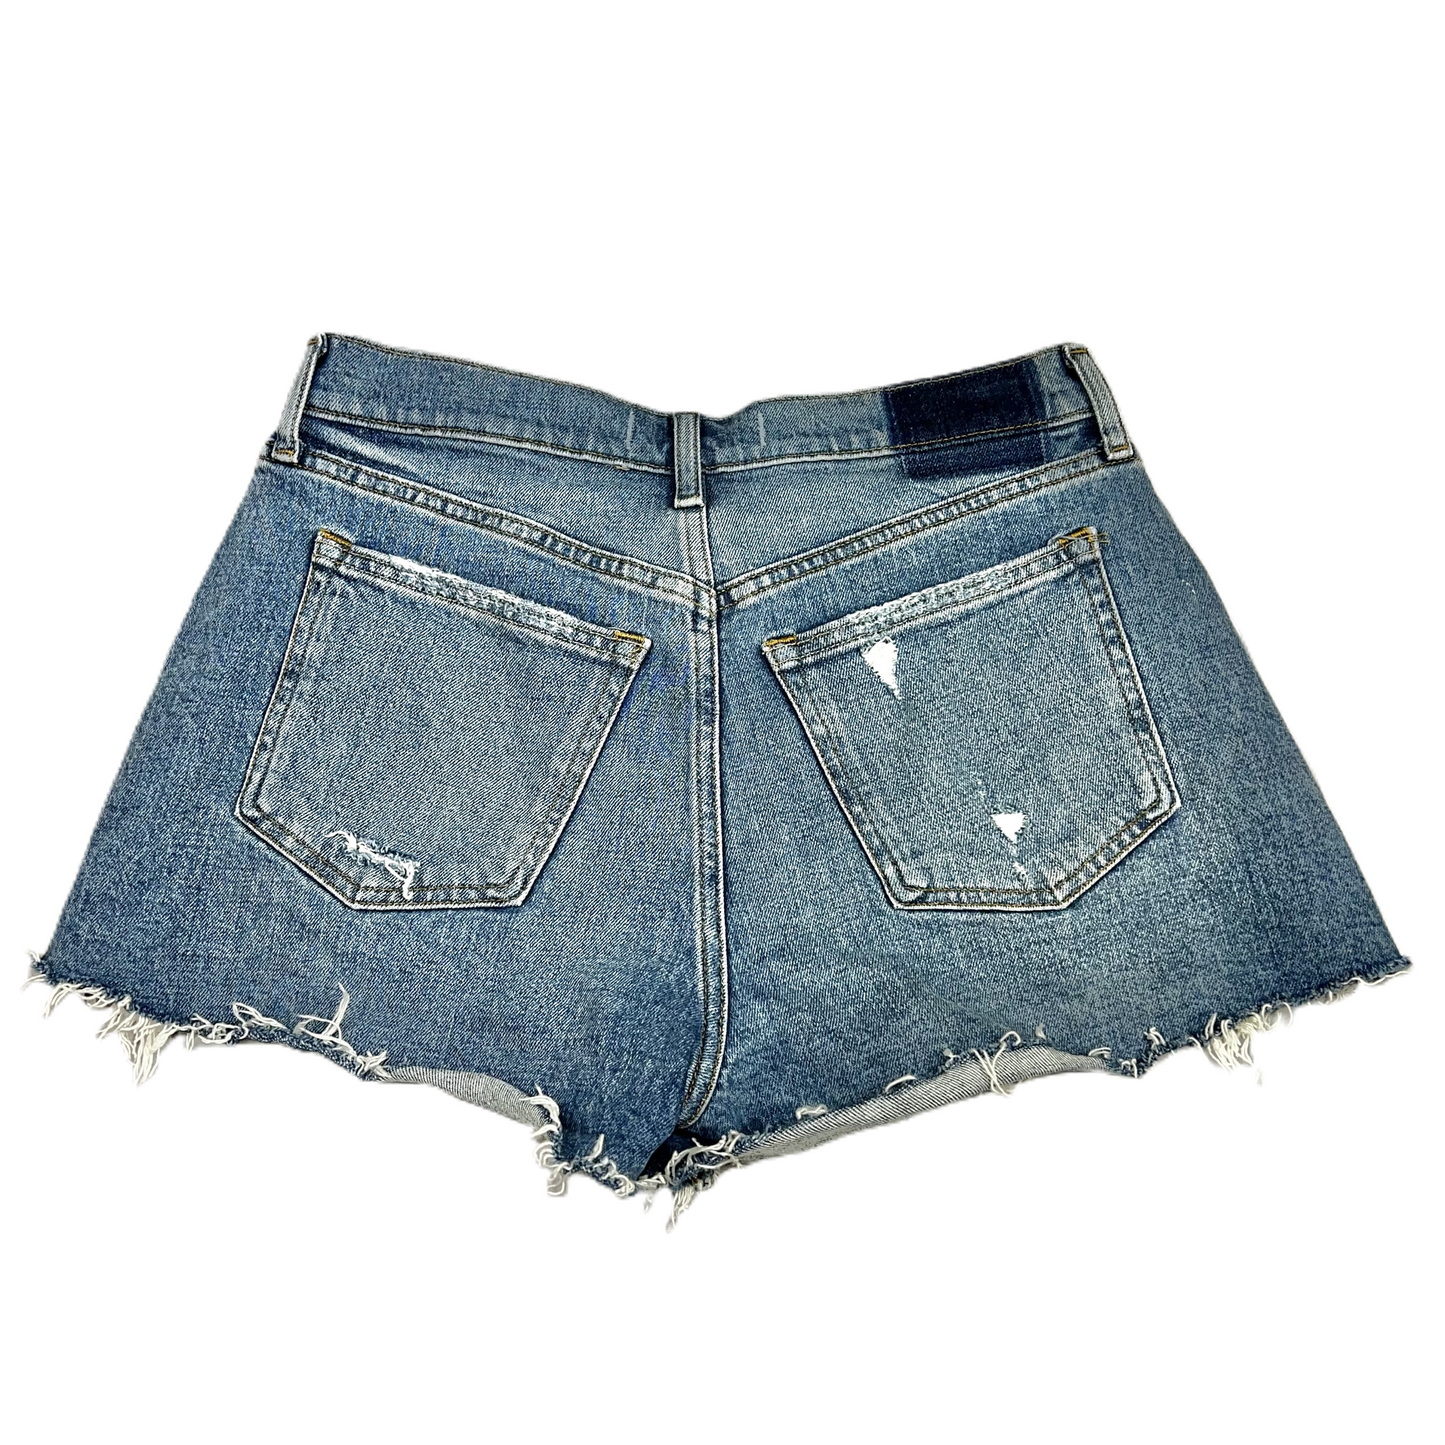 Blue Denim Shorts By Abercrombie And Fitch, Size: 6